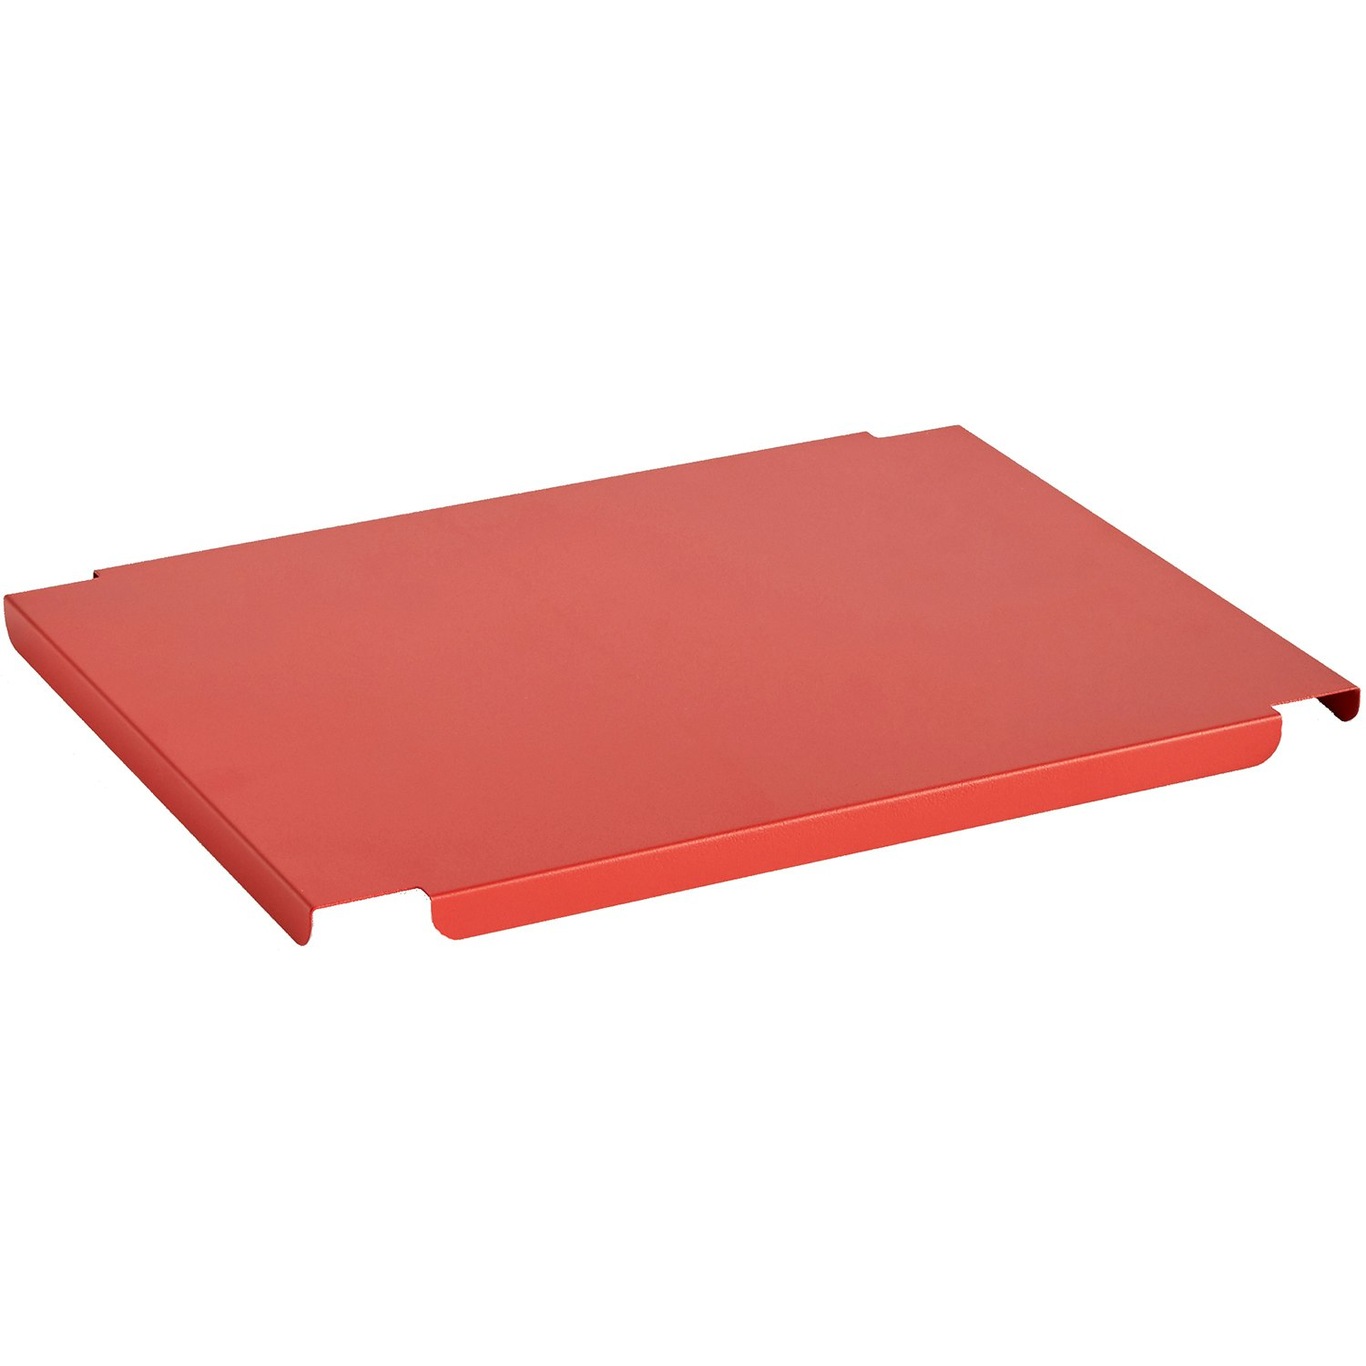 Colour Crate Lid For Storage Box M, Red